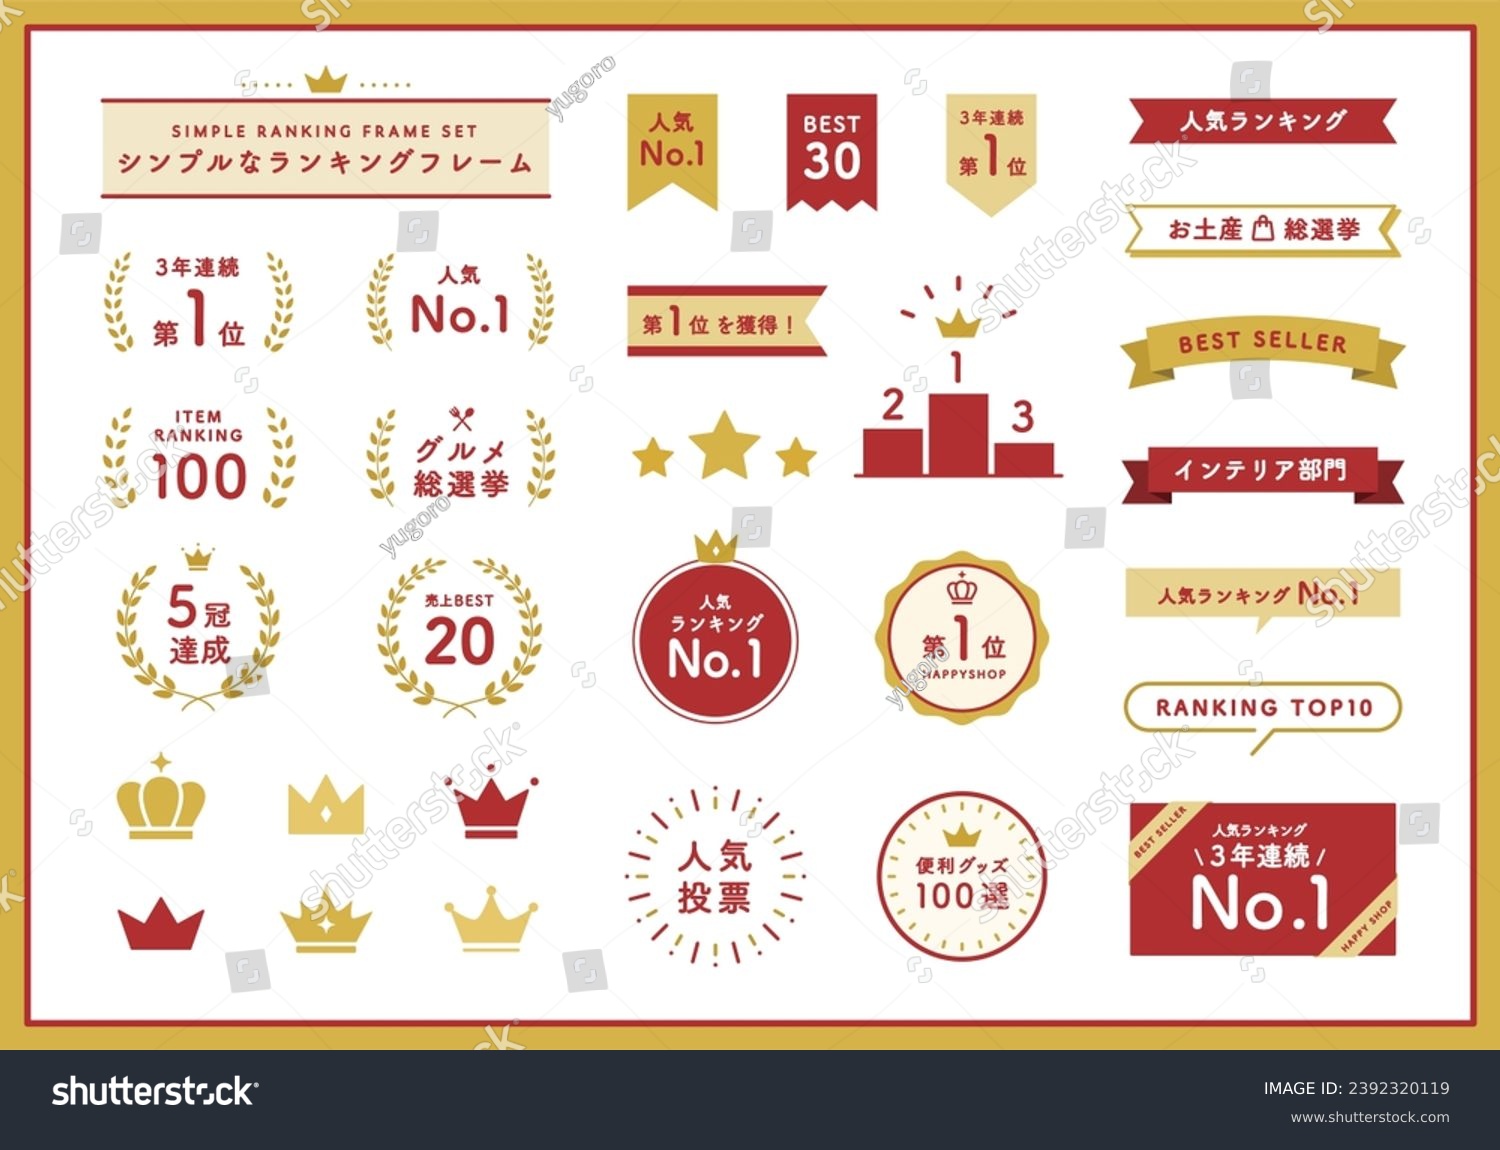 A set of simple ranking frames.
The Japanese text is sample text and has no particular meaning.
Illustrations related to banners, decorations, rankings, winners, icons, ribbons, first place, etc. #2392320119